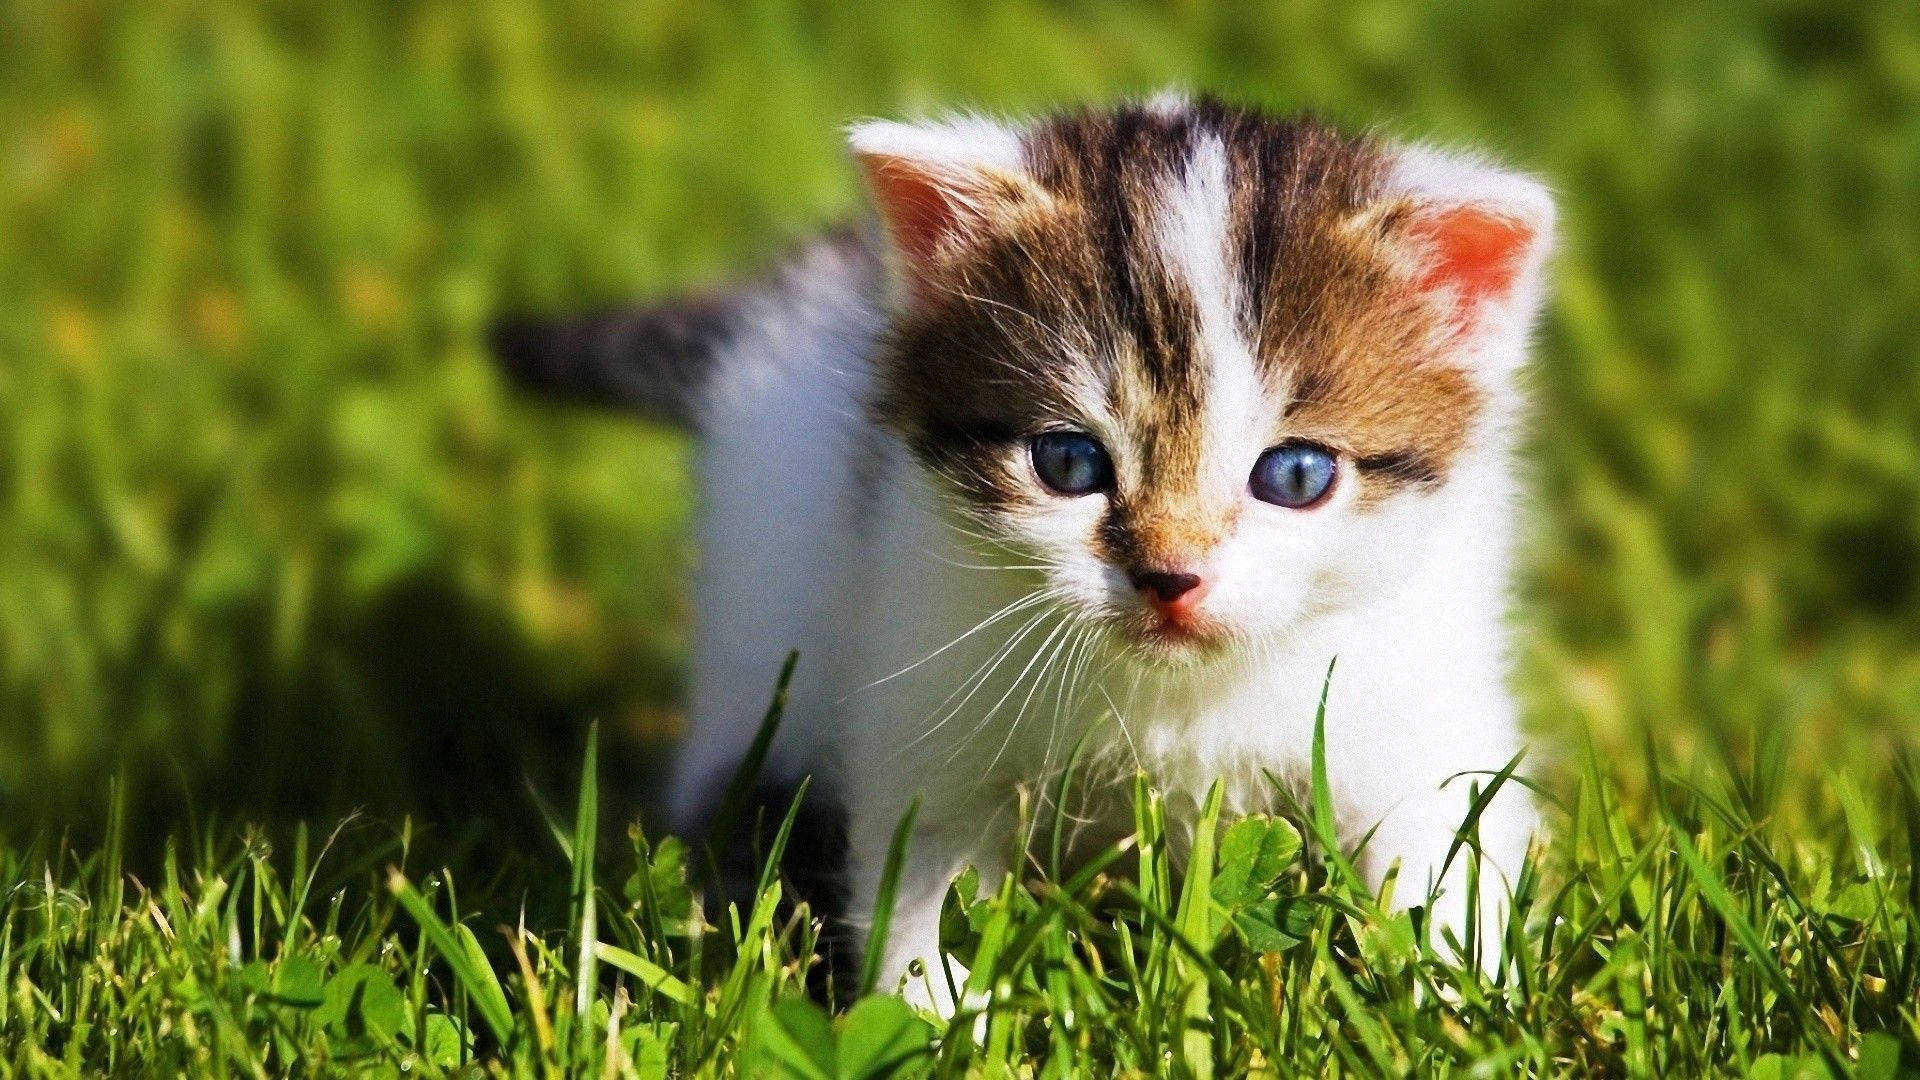 Baby Kitten Animal Playing In Grass Background